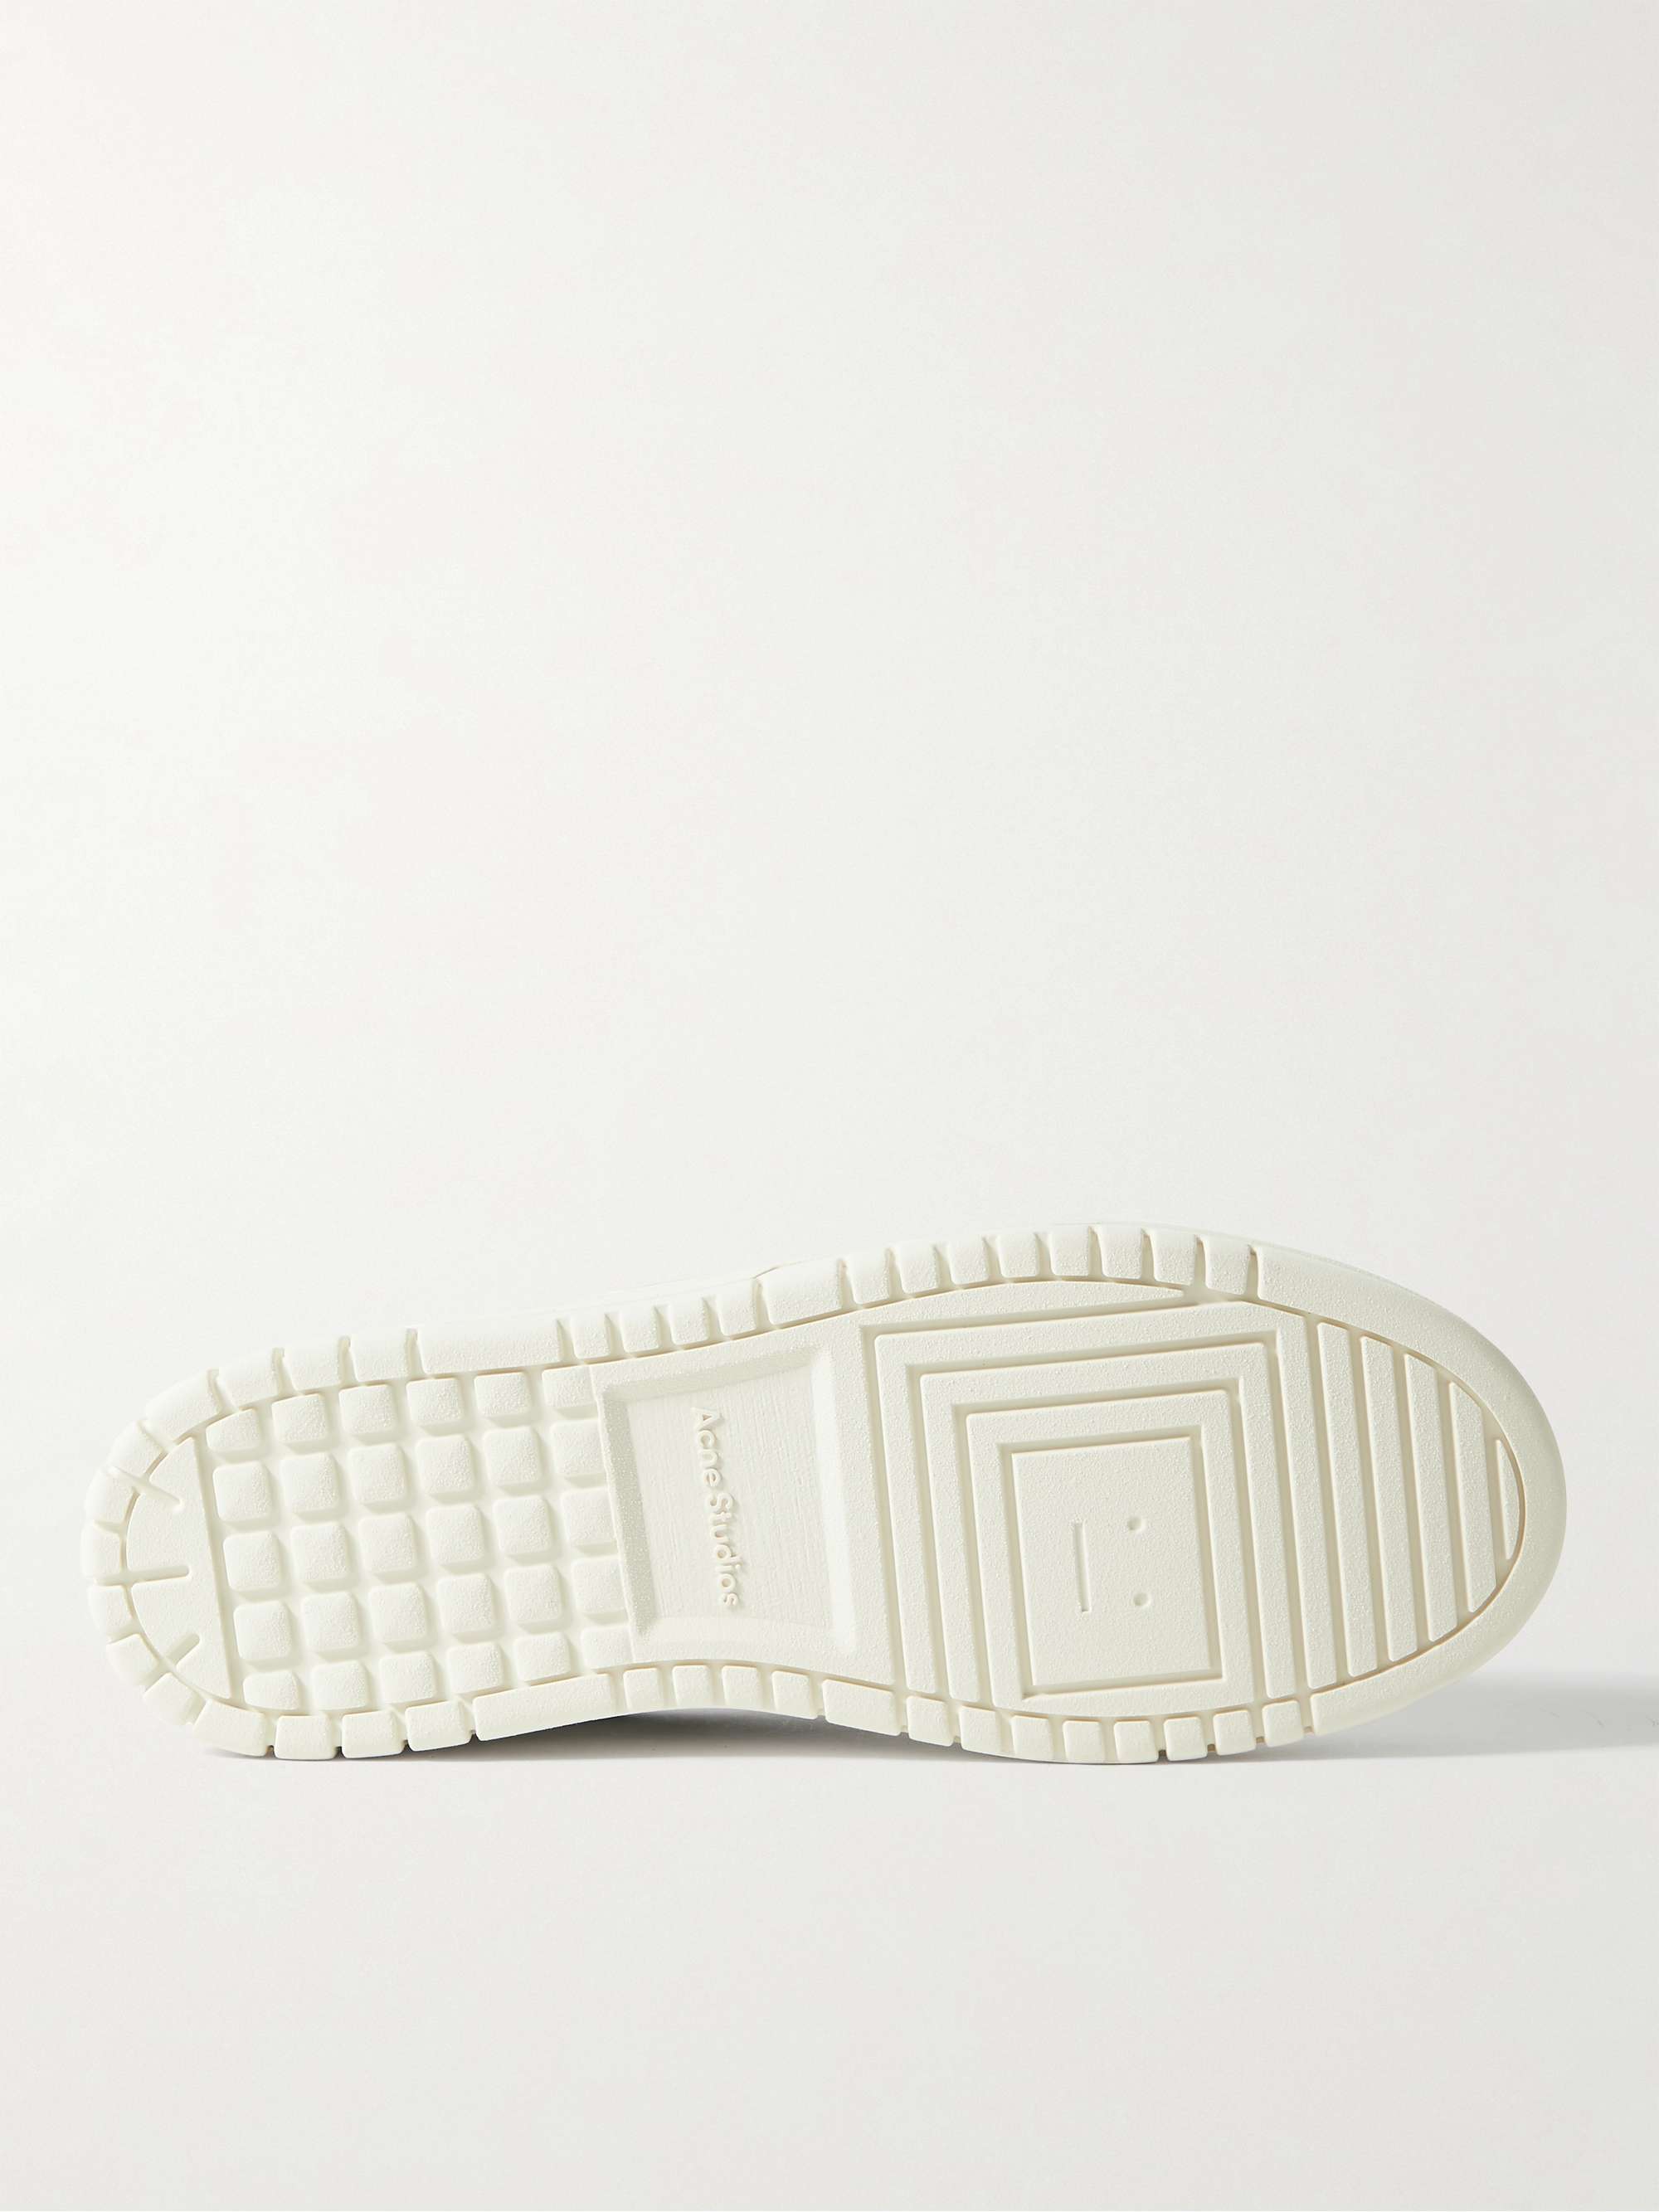 ACNE STUDIOS Suede, Nubuck and Leather Sneakers for Men | MR PORTER